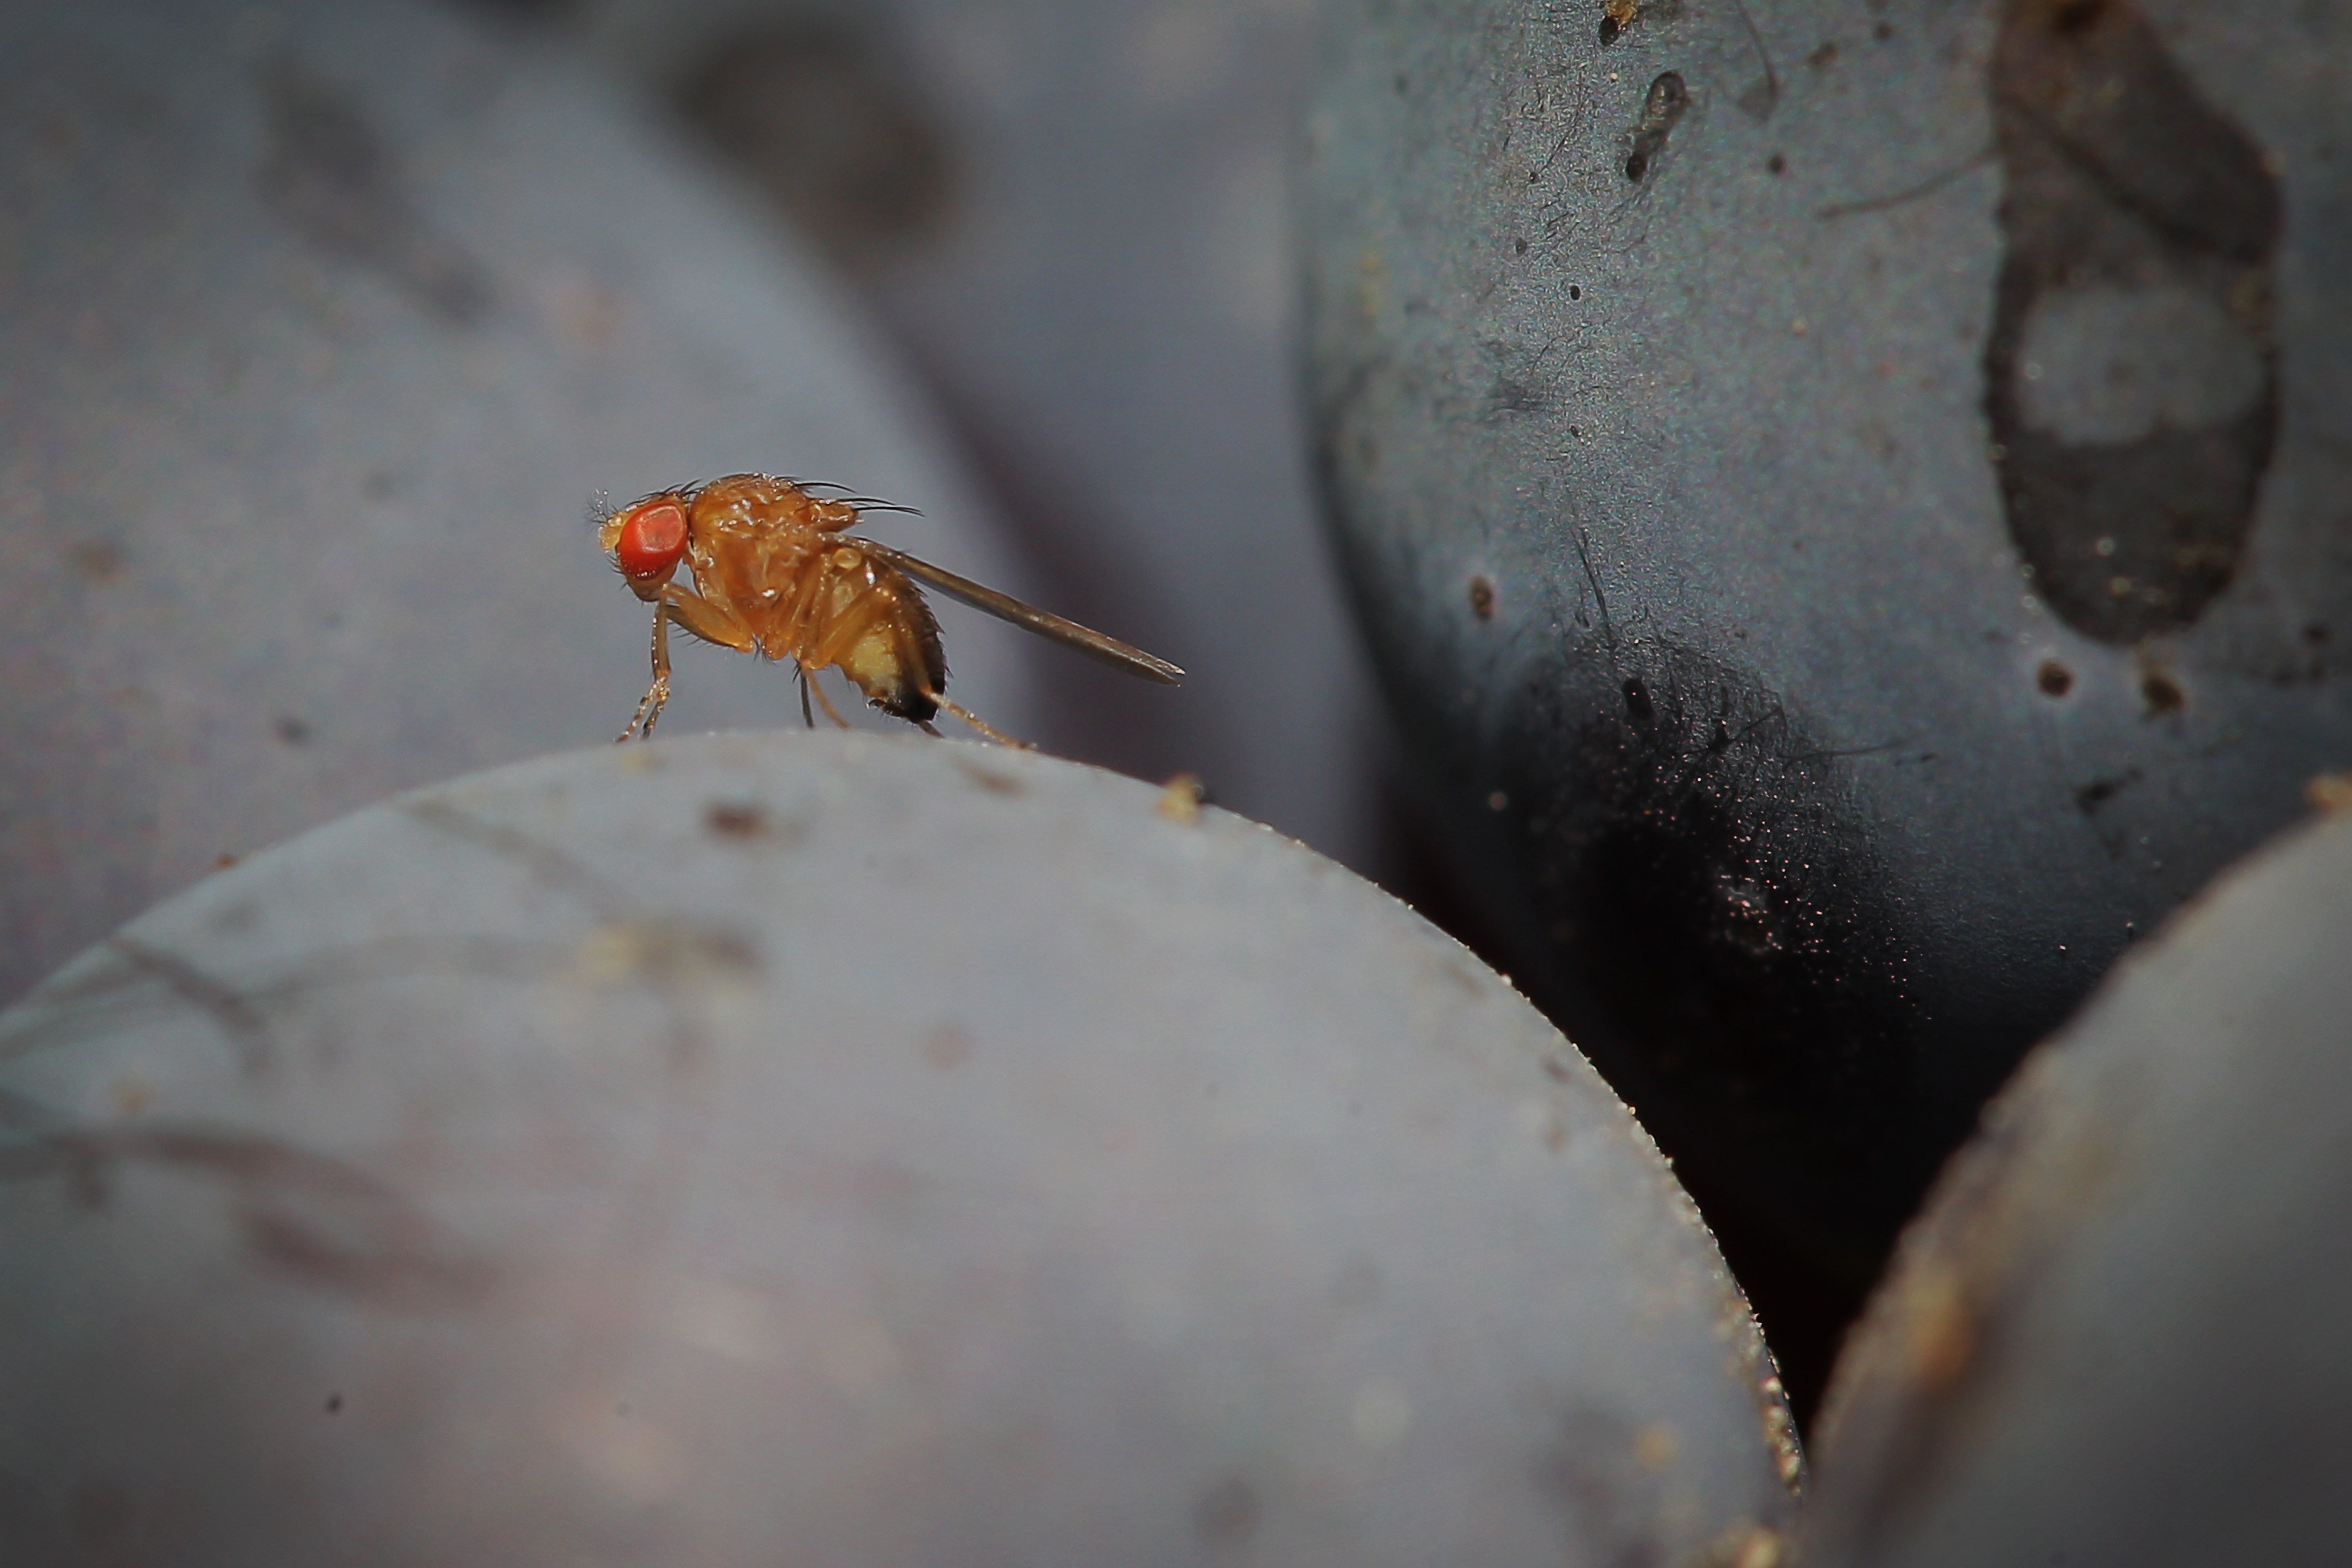 A spotted-wing drosophila (Drosophila suzukii) fly sits on a grape in the vineyard of family Mohr in Bensheim an der Bergstrasse, central Germany, on September 10, 2014